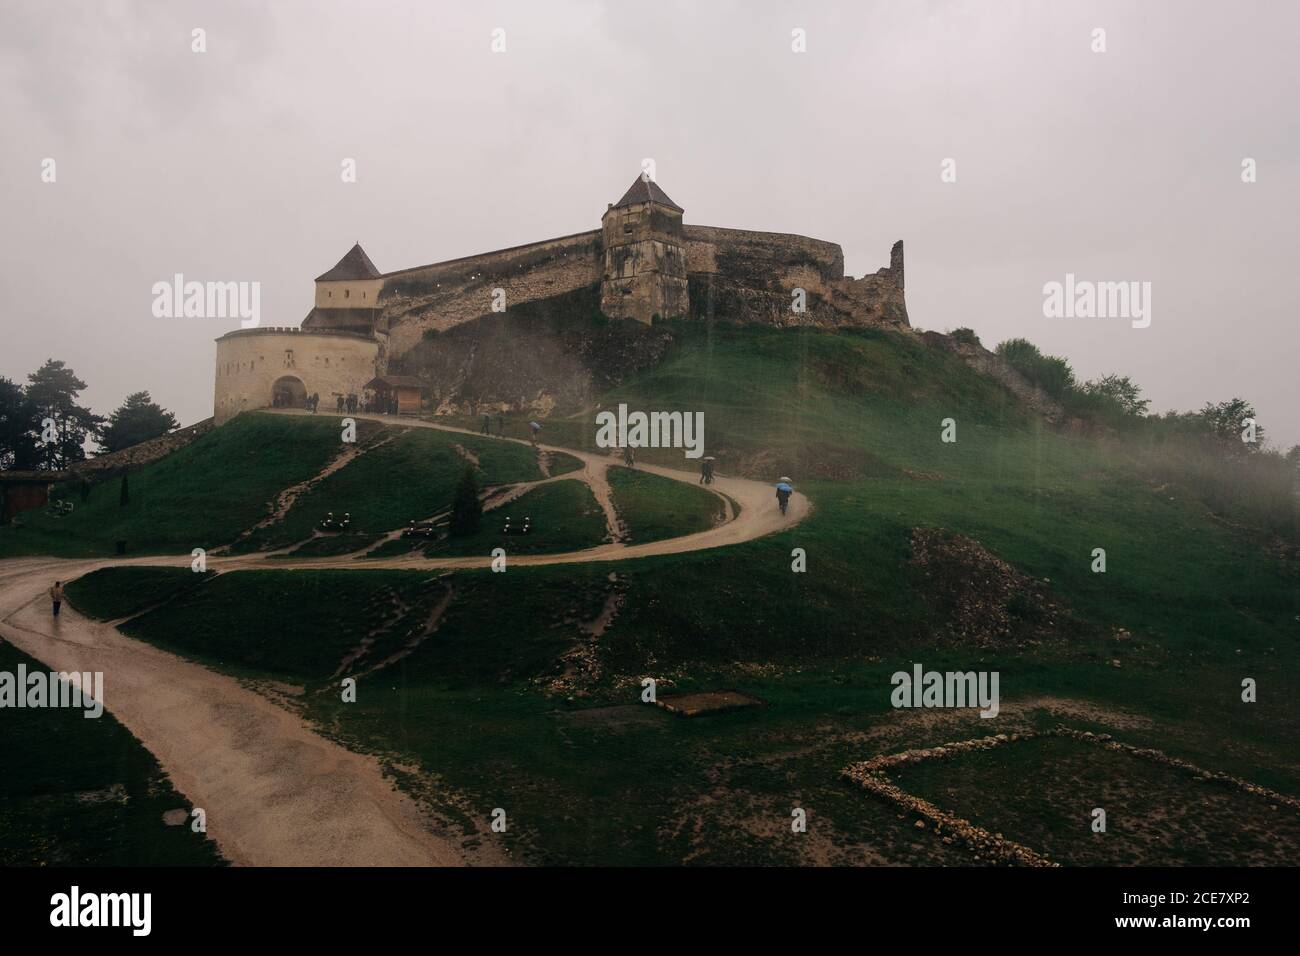 Amazing landscape of medieval Rasnov Fortress in Romania located on green hill with narrow curvy footpath under heavy cloudy sky Stock Photo